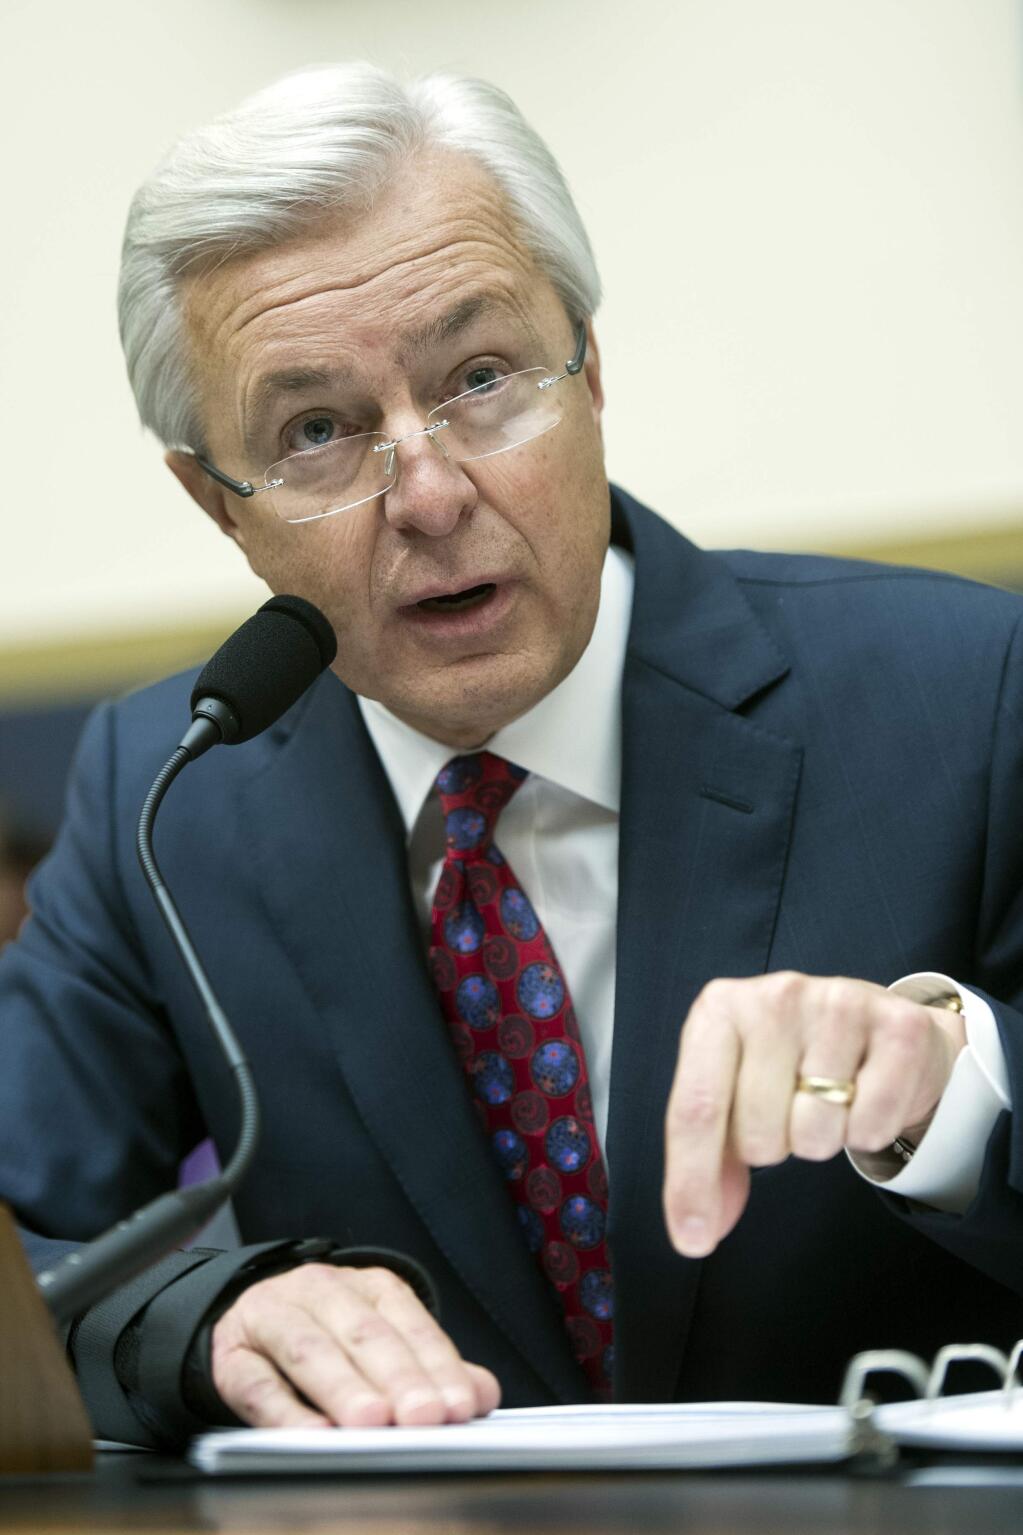 Wells Fargo CEO John Stumpf testifies on Capitol Hill in Washington, Thursday, Sept. 29, 2016, before the House Financial Services Committee investigating Wells Fargo's opening of unauthorized customer accounts. (AP Photo/Cliff Owen)